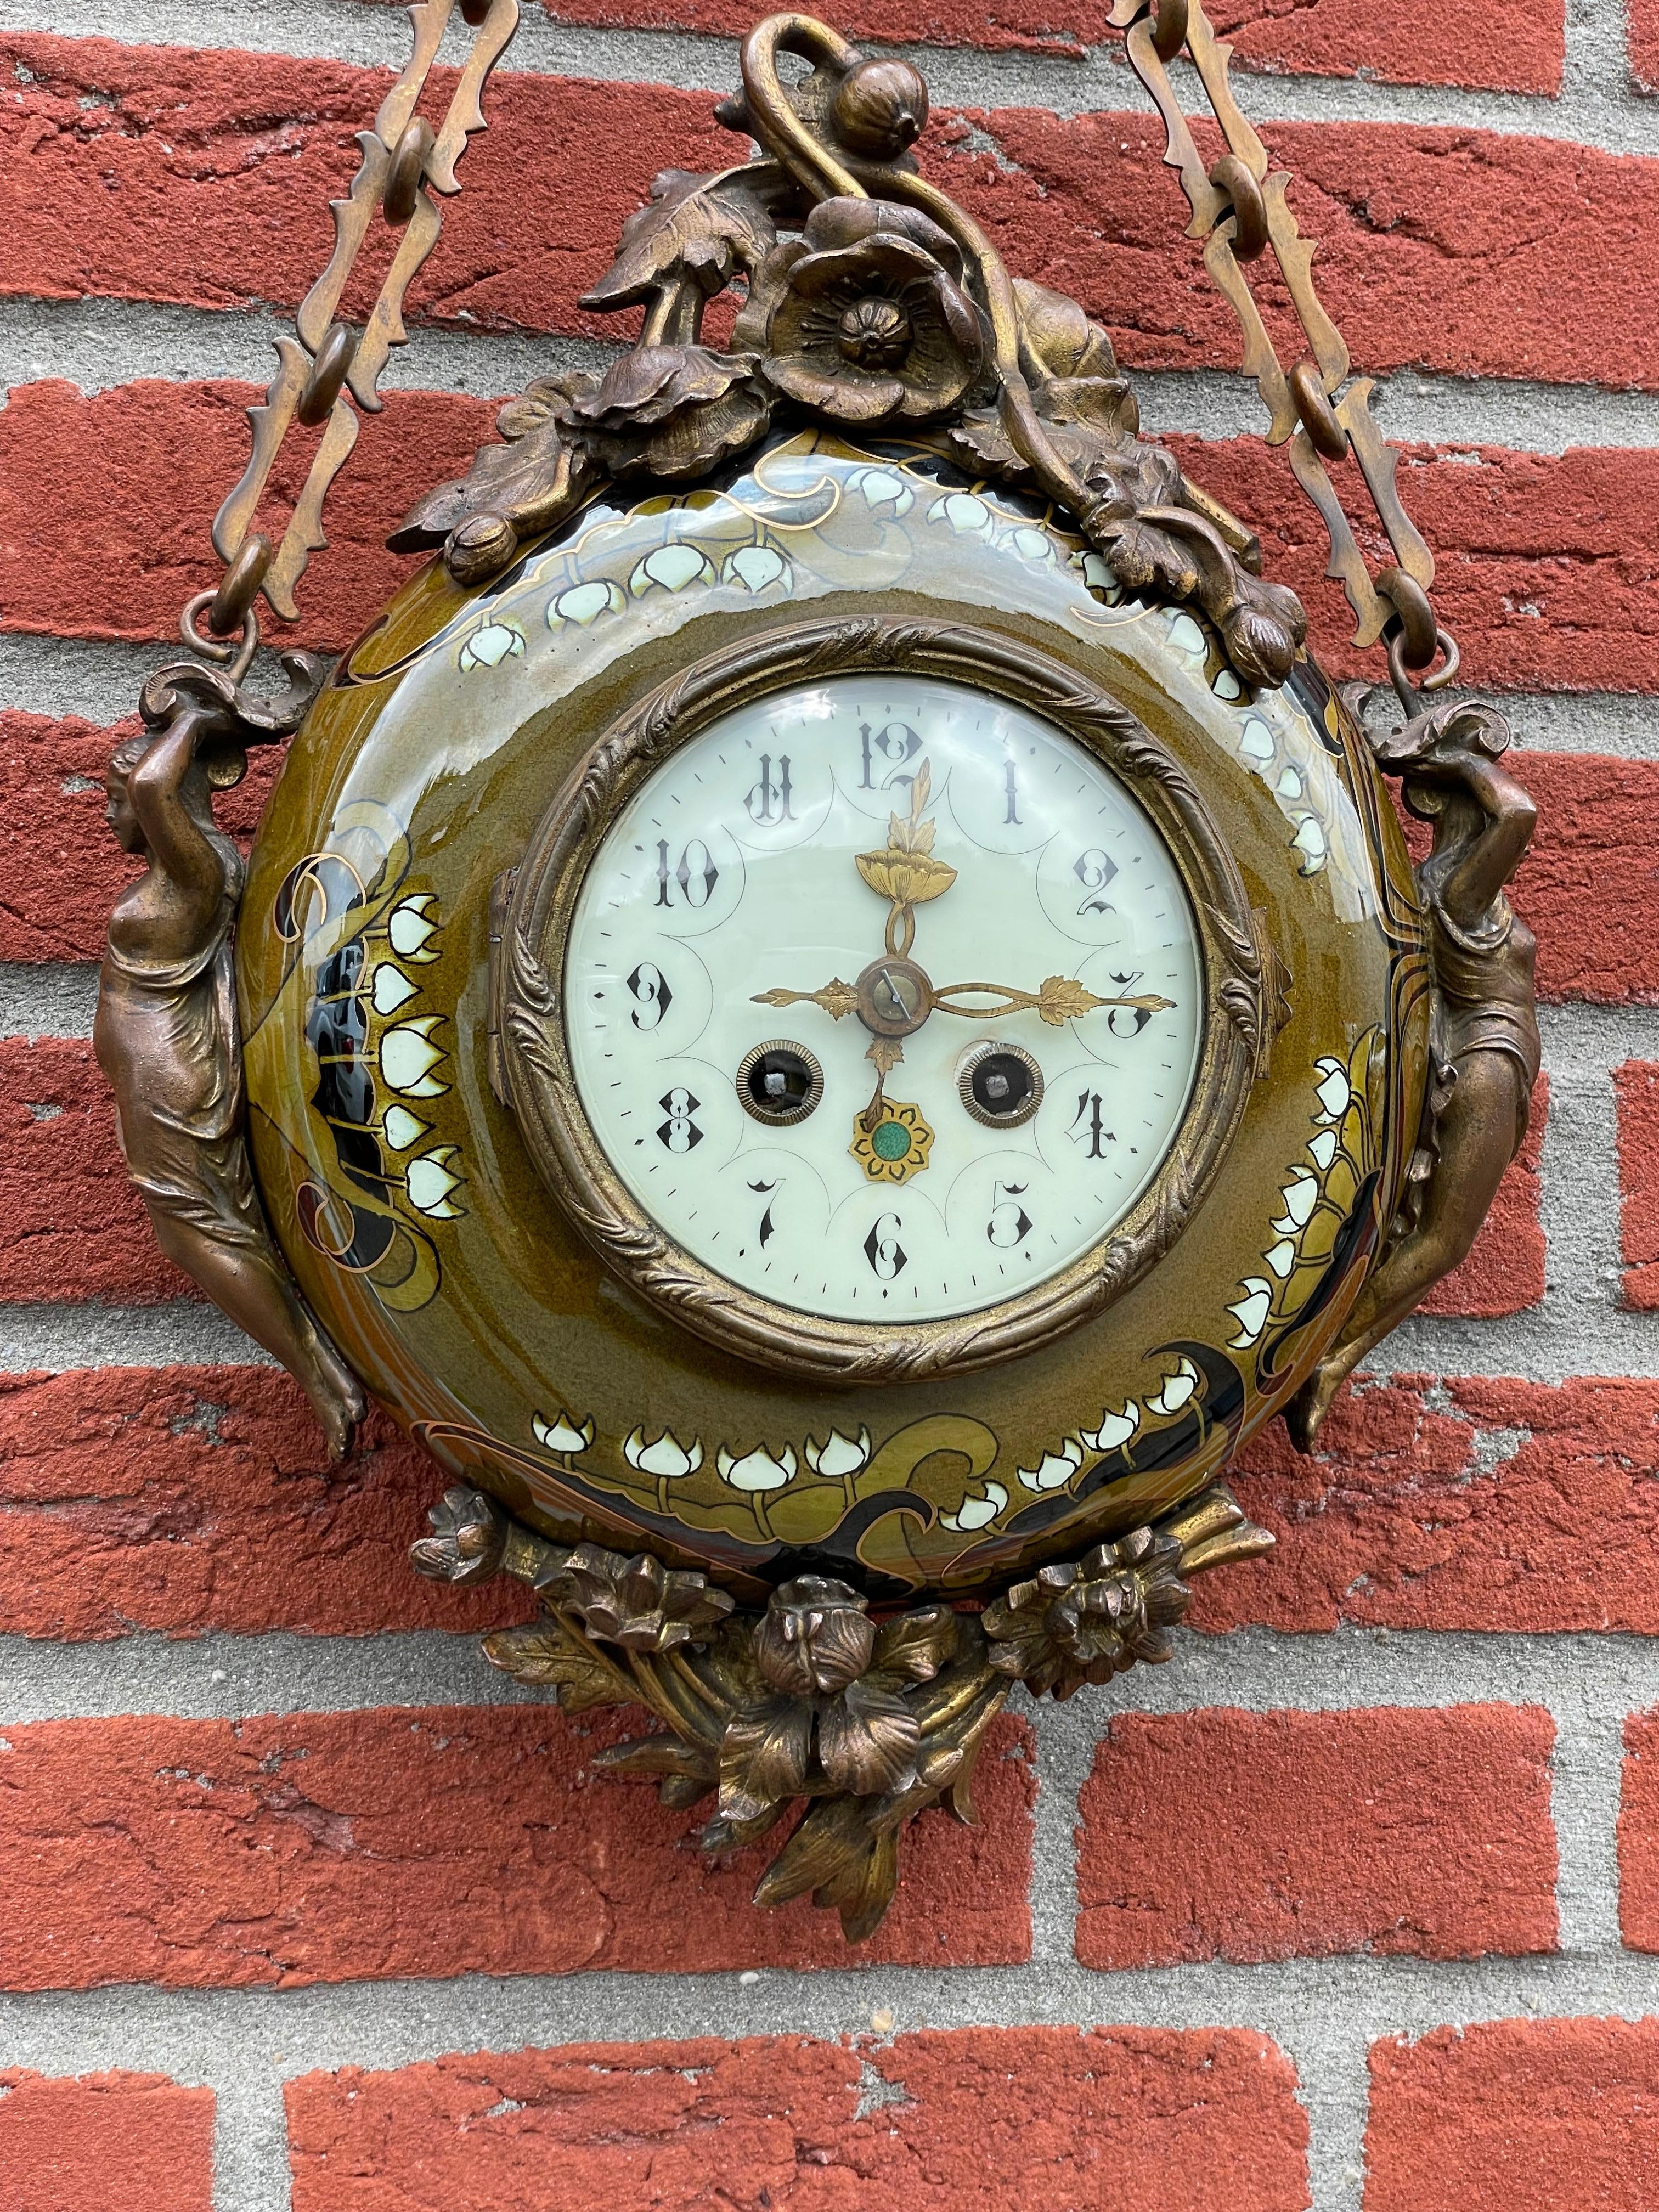 Antique & Hand Painted Arts & Crafts Majolica Wall Clock with Enameled Dial Face 1